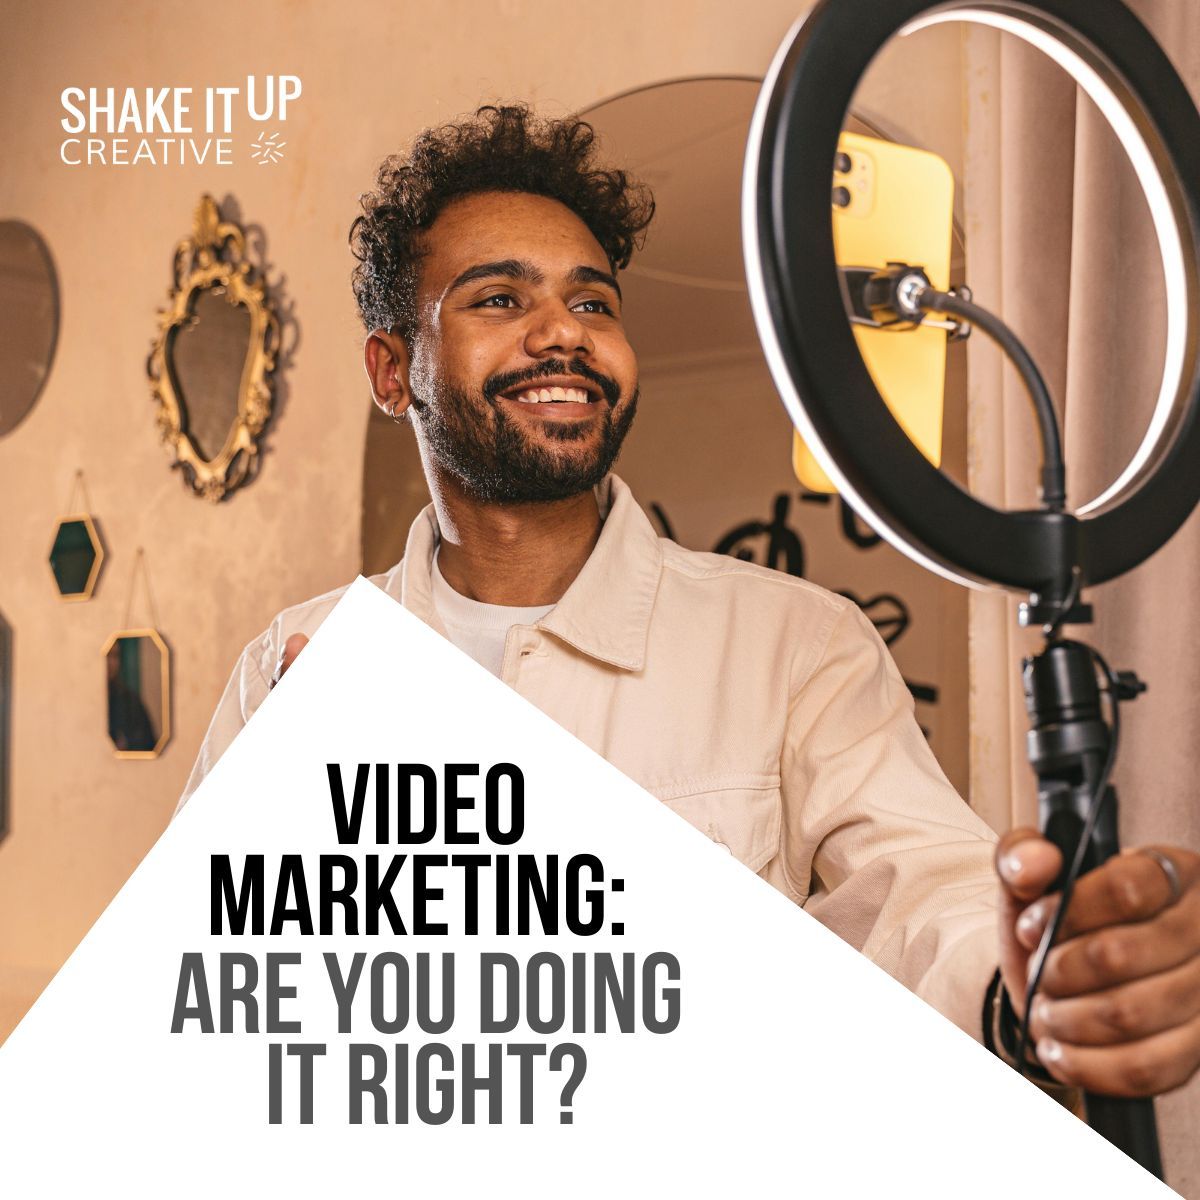 🎥 Video marketing produces the highest engagement and conversion rates than any other forms of content - so it's important to get it right.

Learn to elevate your videos with our blog's tips! 🚀 Read here: buff.ly/4bkS2cG 
#VideoMarketing #Engagement #Conversion